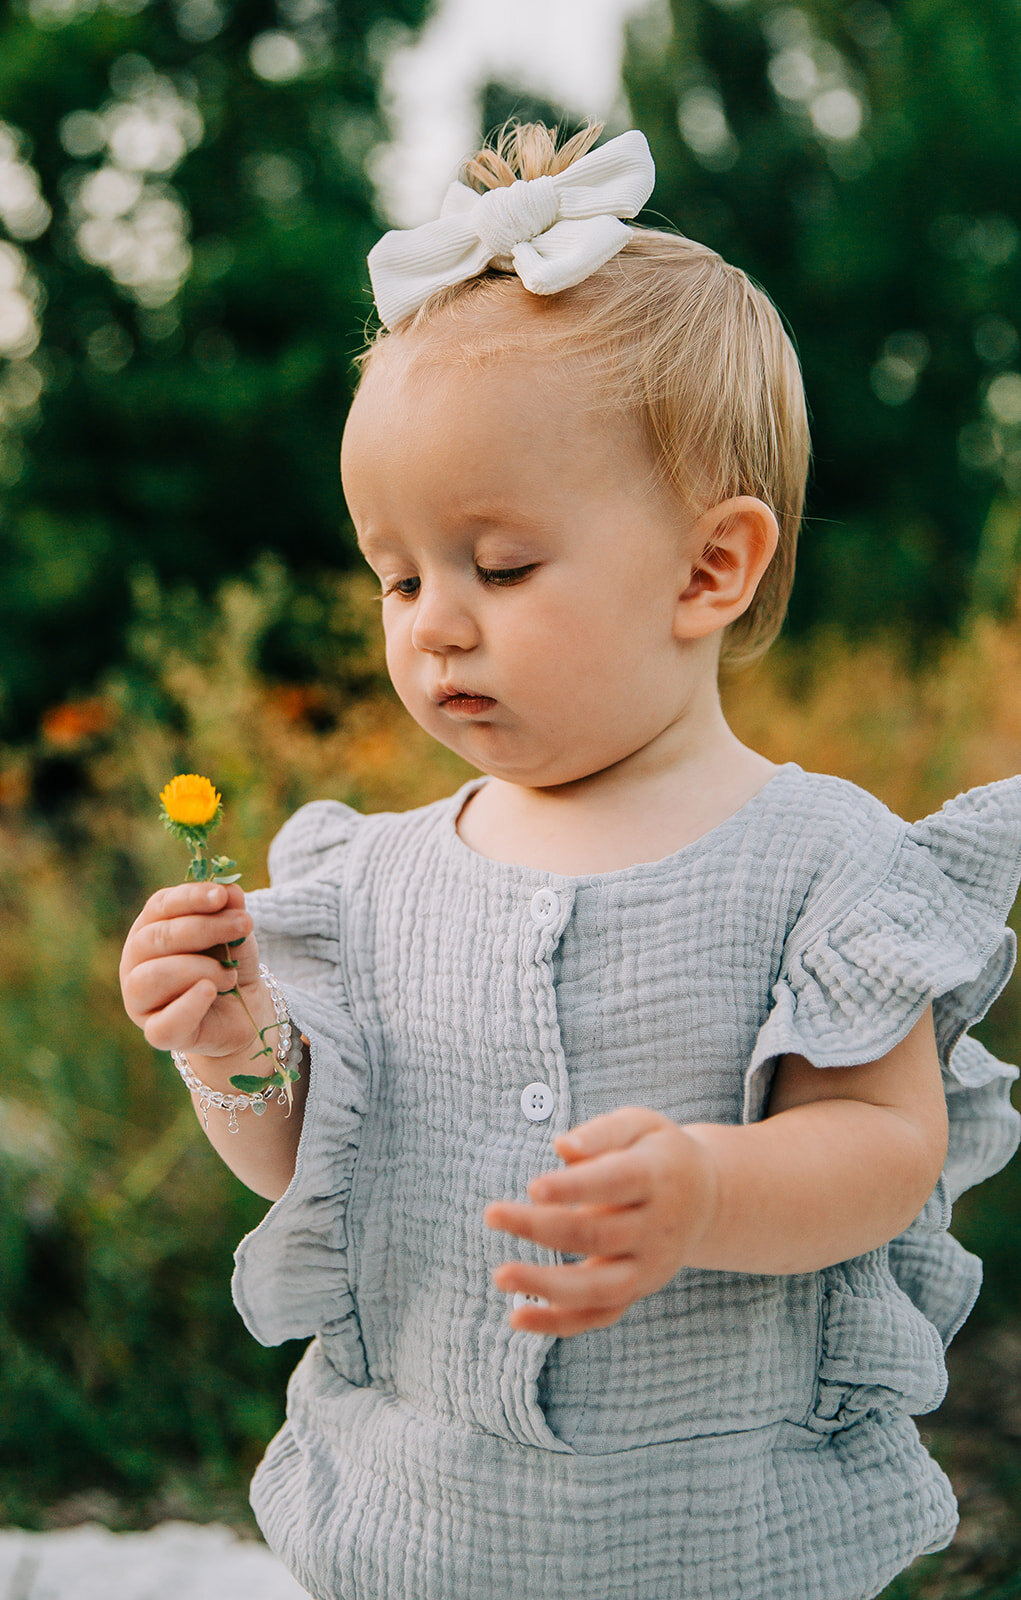  happy birthday birthday girl baby turns one baby fashion inspo baby hairstyle ideas clothing ideas for baby girls picking flowers at the park wild flowers and tall grass colorful flowers baby posing inspo kids fashion inspo Denzil Stewart park baby 